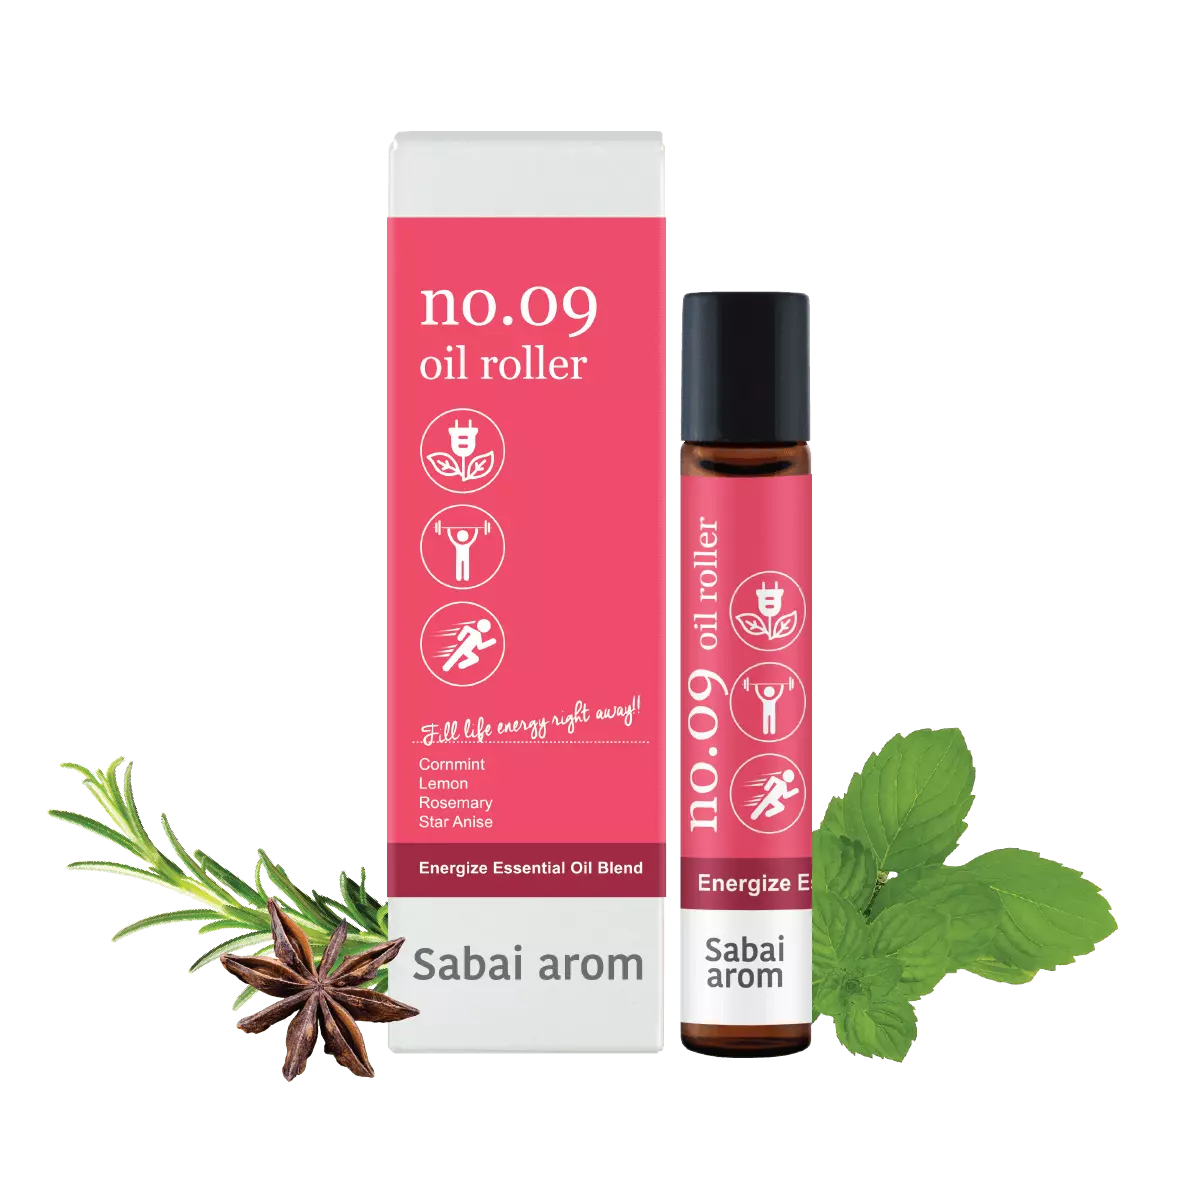 oil roller no09 1 <h2>No.9 Oil Roller is a super blend to pop in your pocket</h2> or close at hand just when you need something to instantly empower your guts and help you move forward with full energy. It contains therapeutic power of pure essential oils from Lavender, Ylang, Ylang, Chamomile, Eucalyptus, Bergamot and Orange in a conveniently carry-away sizing. <strong>Scent</strong> : The uplifting power of zesty Lime in collaboration with warm spice aroma of Star Anise to put you in the full recharging and ready-to-be-tough mode and bring back life energy at height.